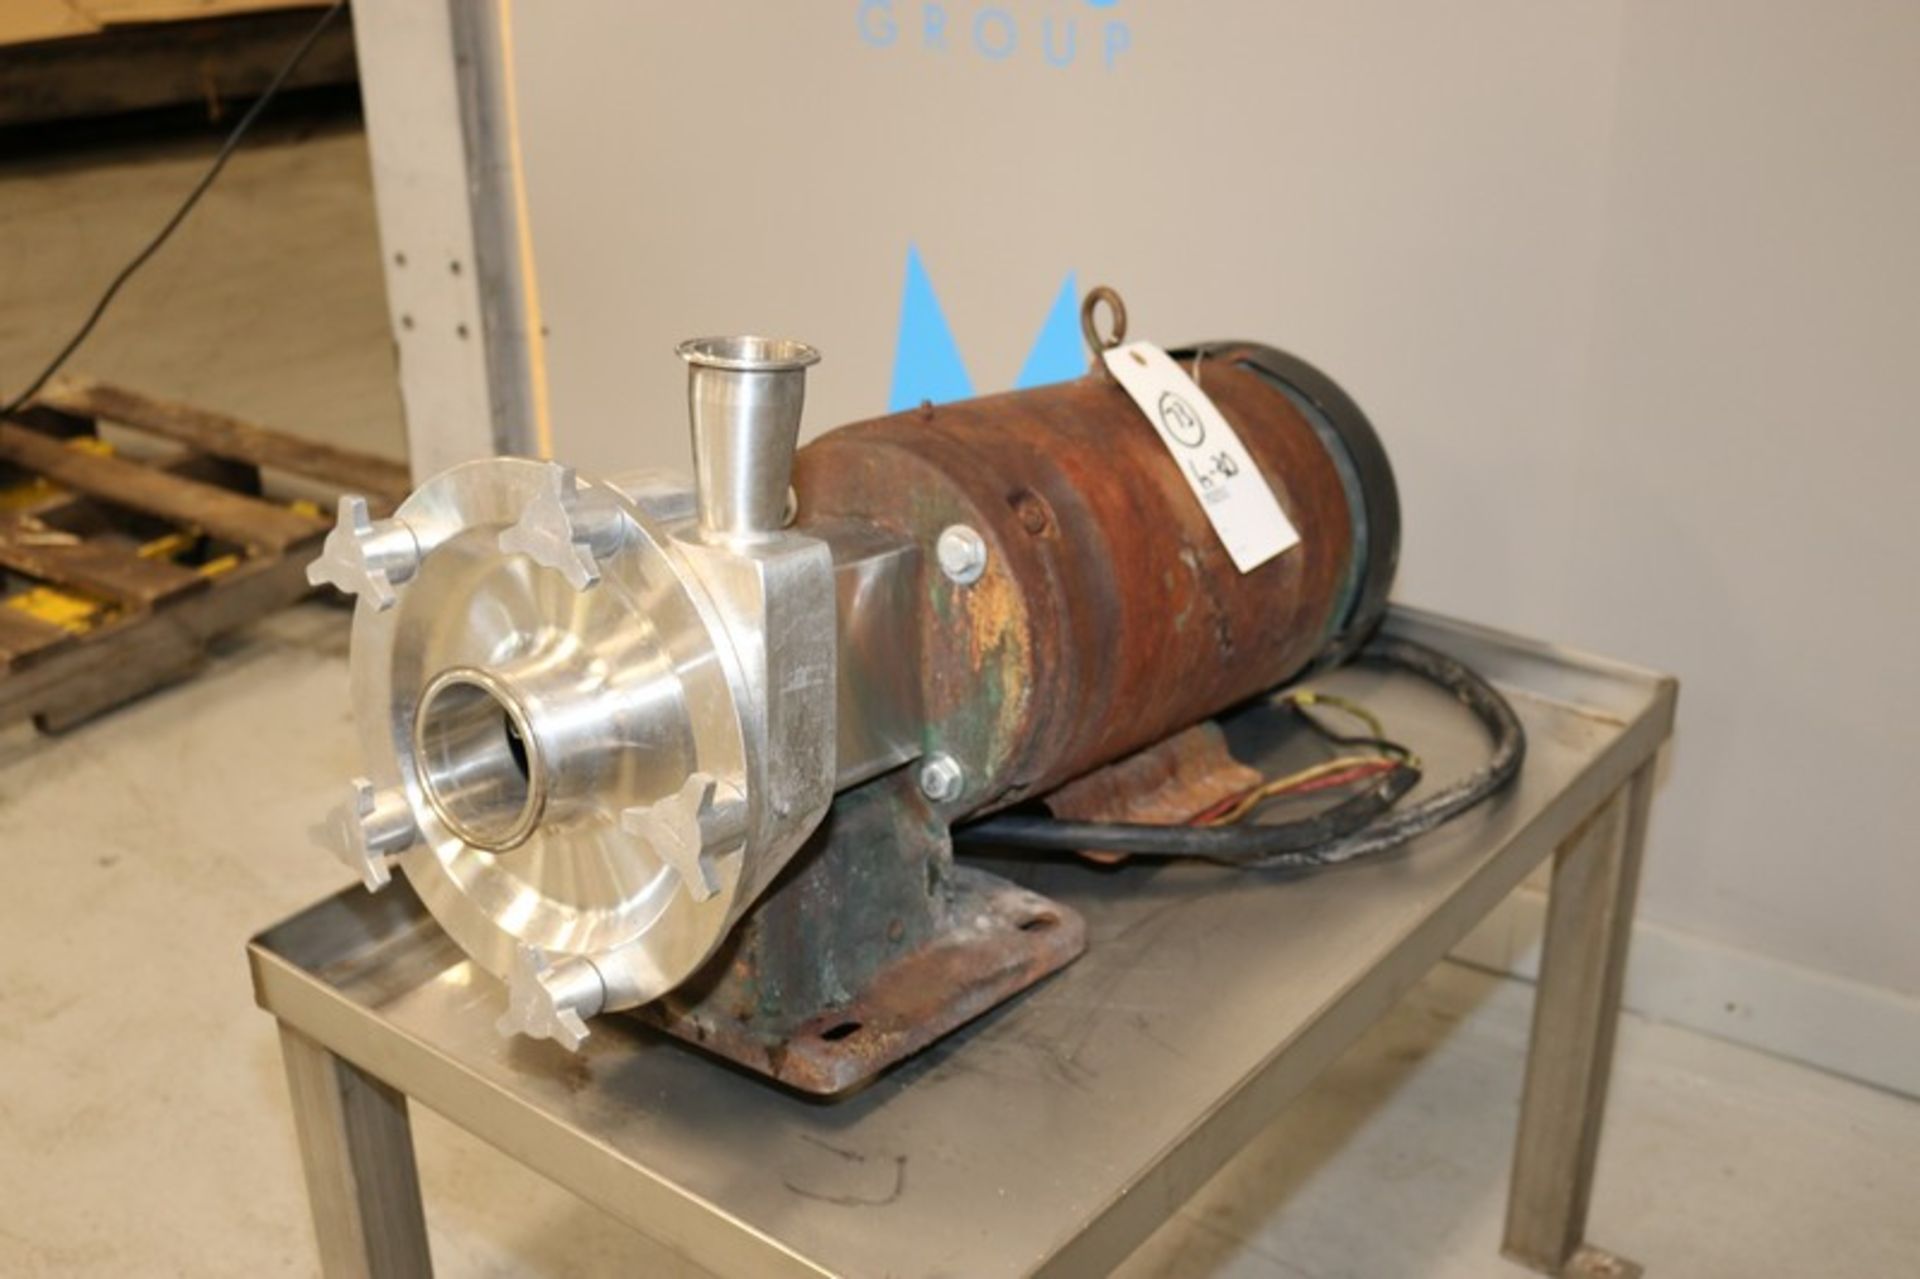 Fristam Aprox. 10 hp Centrifugal Pump, M/N FP1732-165, S/N FP175229739919, with Aprox. 2" x 3" Clamp - Image 2 of 6